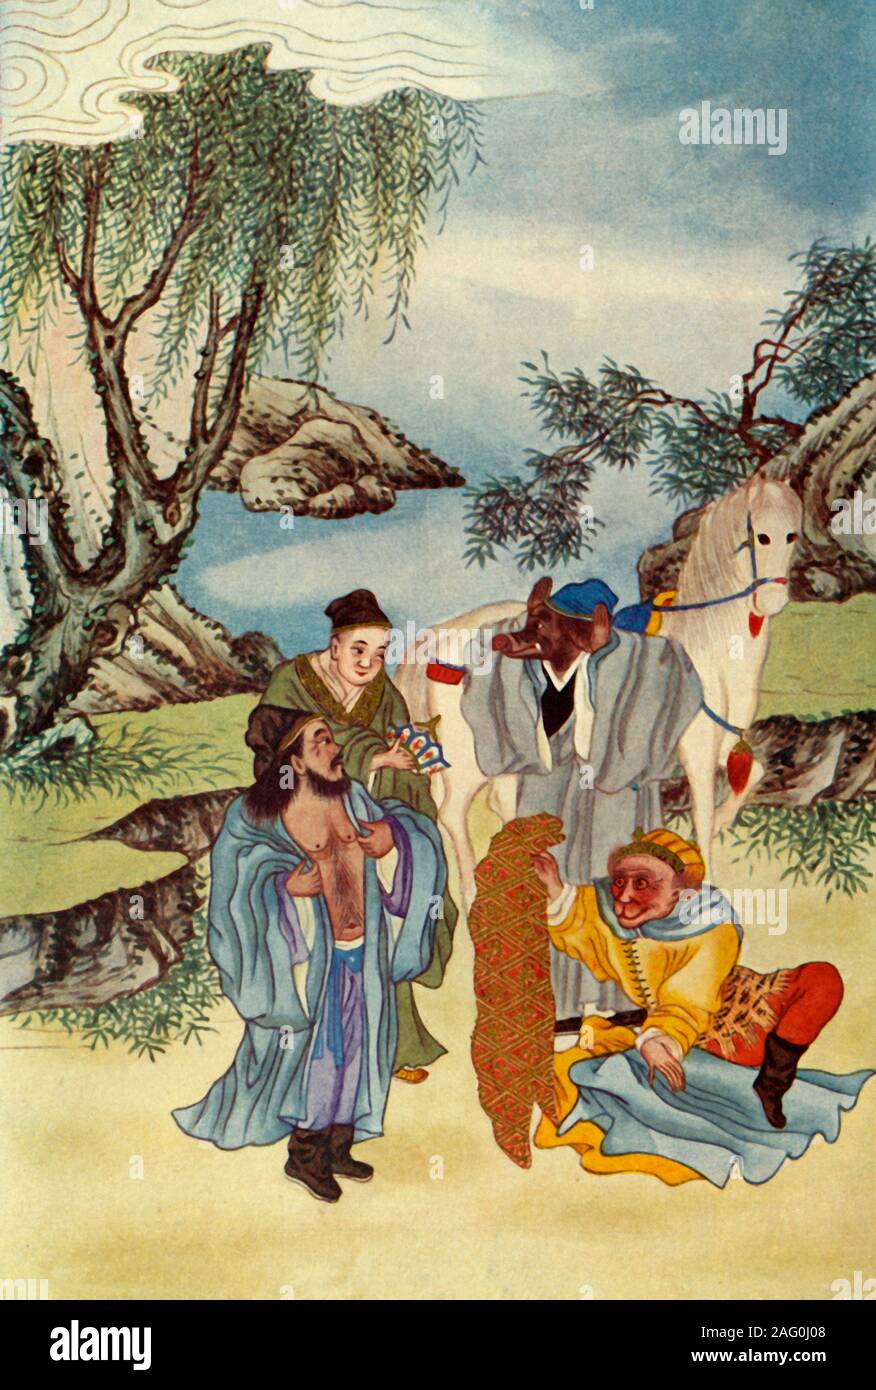 'Sun Steals Clothing for his Master', 1922. The Monkey King, Sun Wukong steals clothing for disguise in the 16th-century Chinese novel Journey to the West by Wu Cheng'en. From &quot;Myths and Legends of China&quot;, by E. T. C. Werner. [George G. Harrap &amp; Co. Ltd., London, Calcutta, Sydney, 1922] Stock Photo